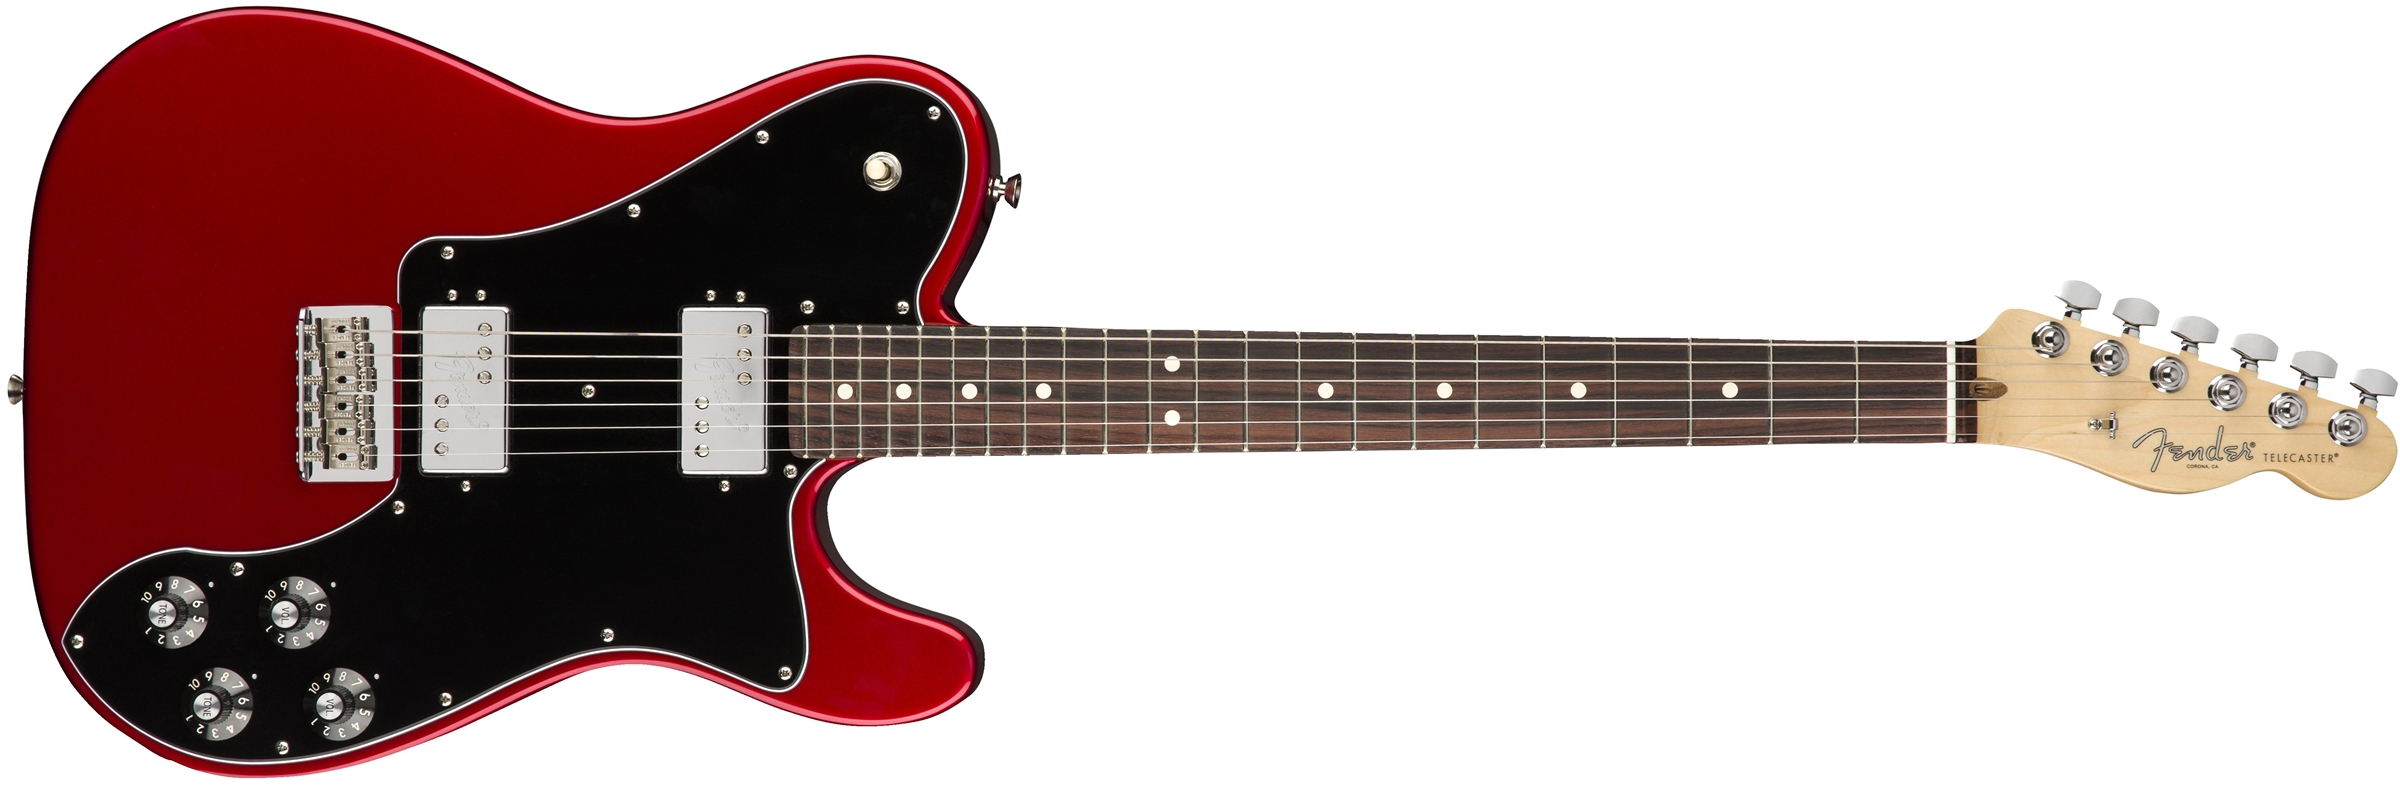 American Professional Telecaster Deluxe ShawBucker - Candy Apple Red